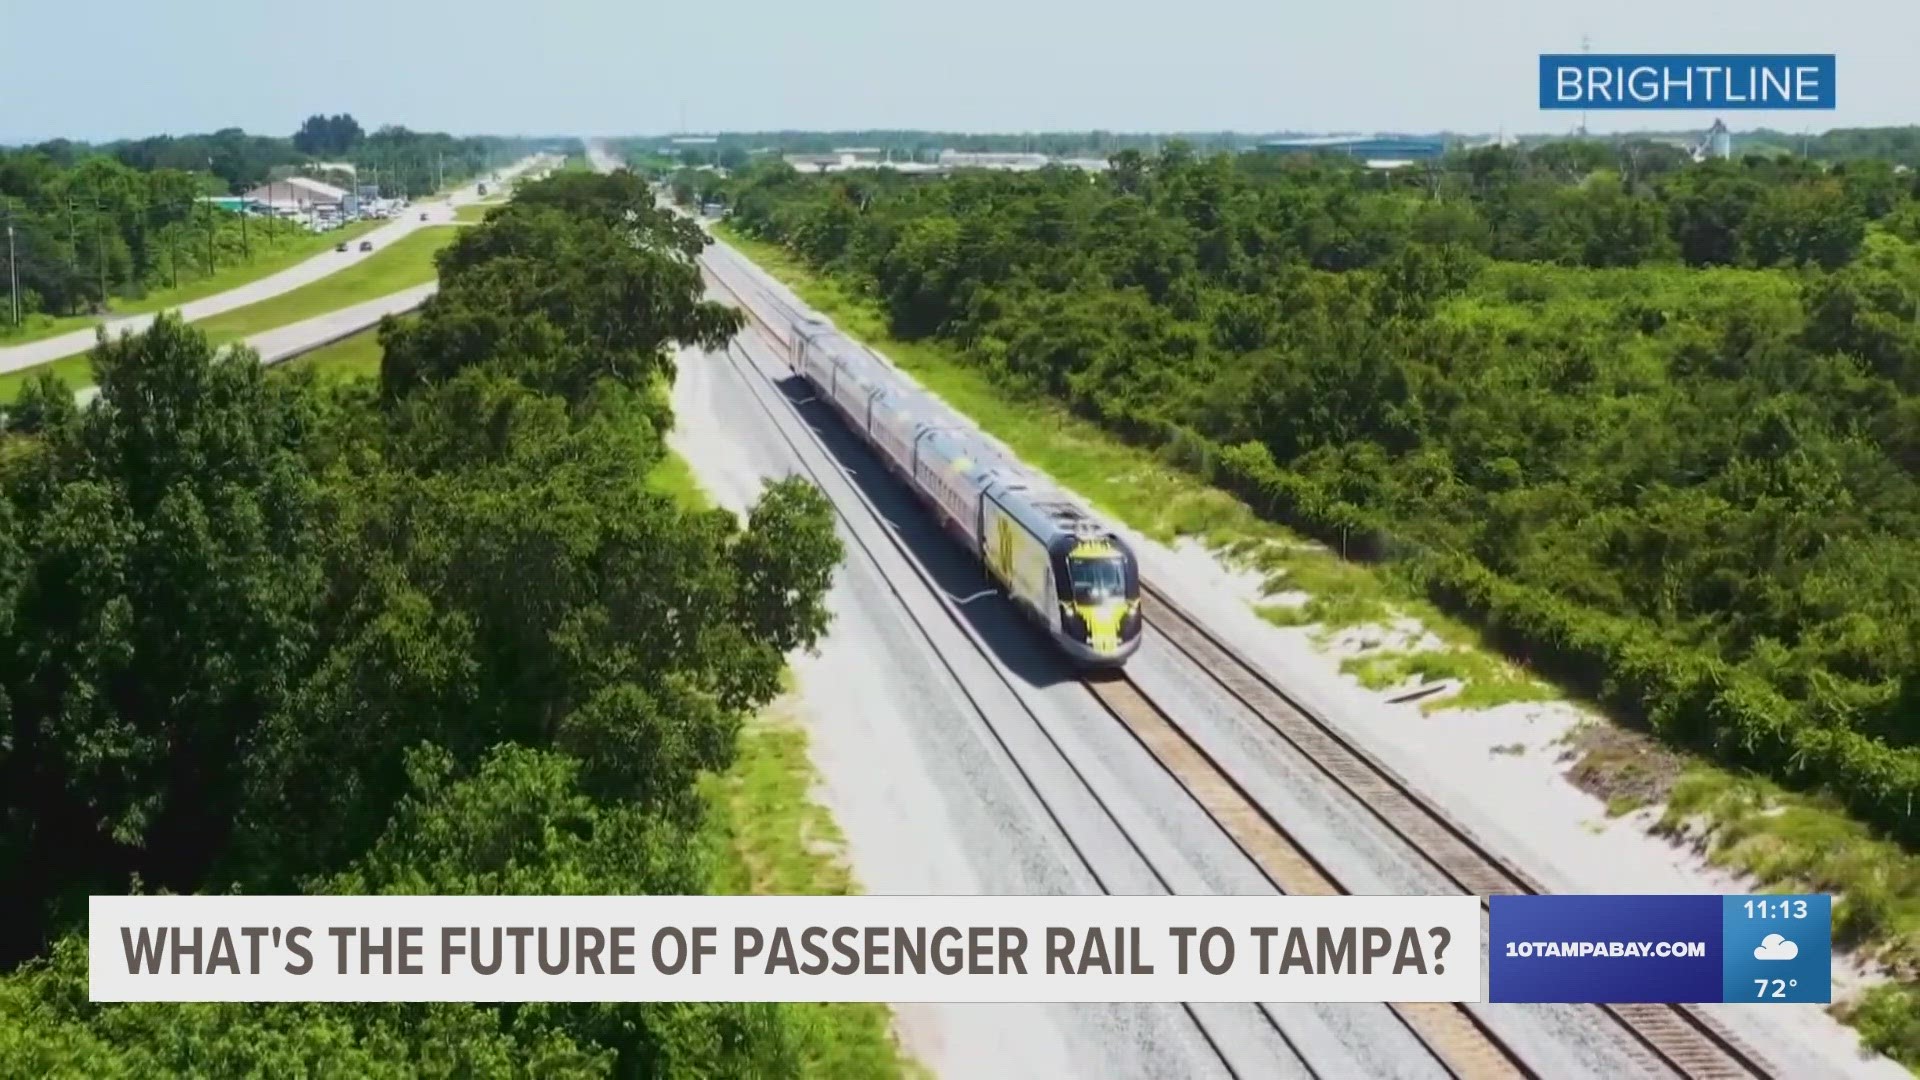 Transportation experts weighed in of the future of the Brightline passenger rail in Tampa.